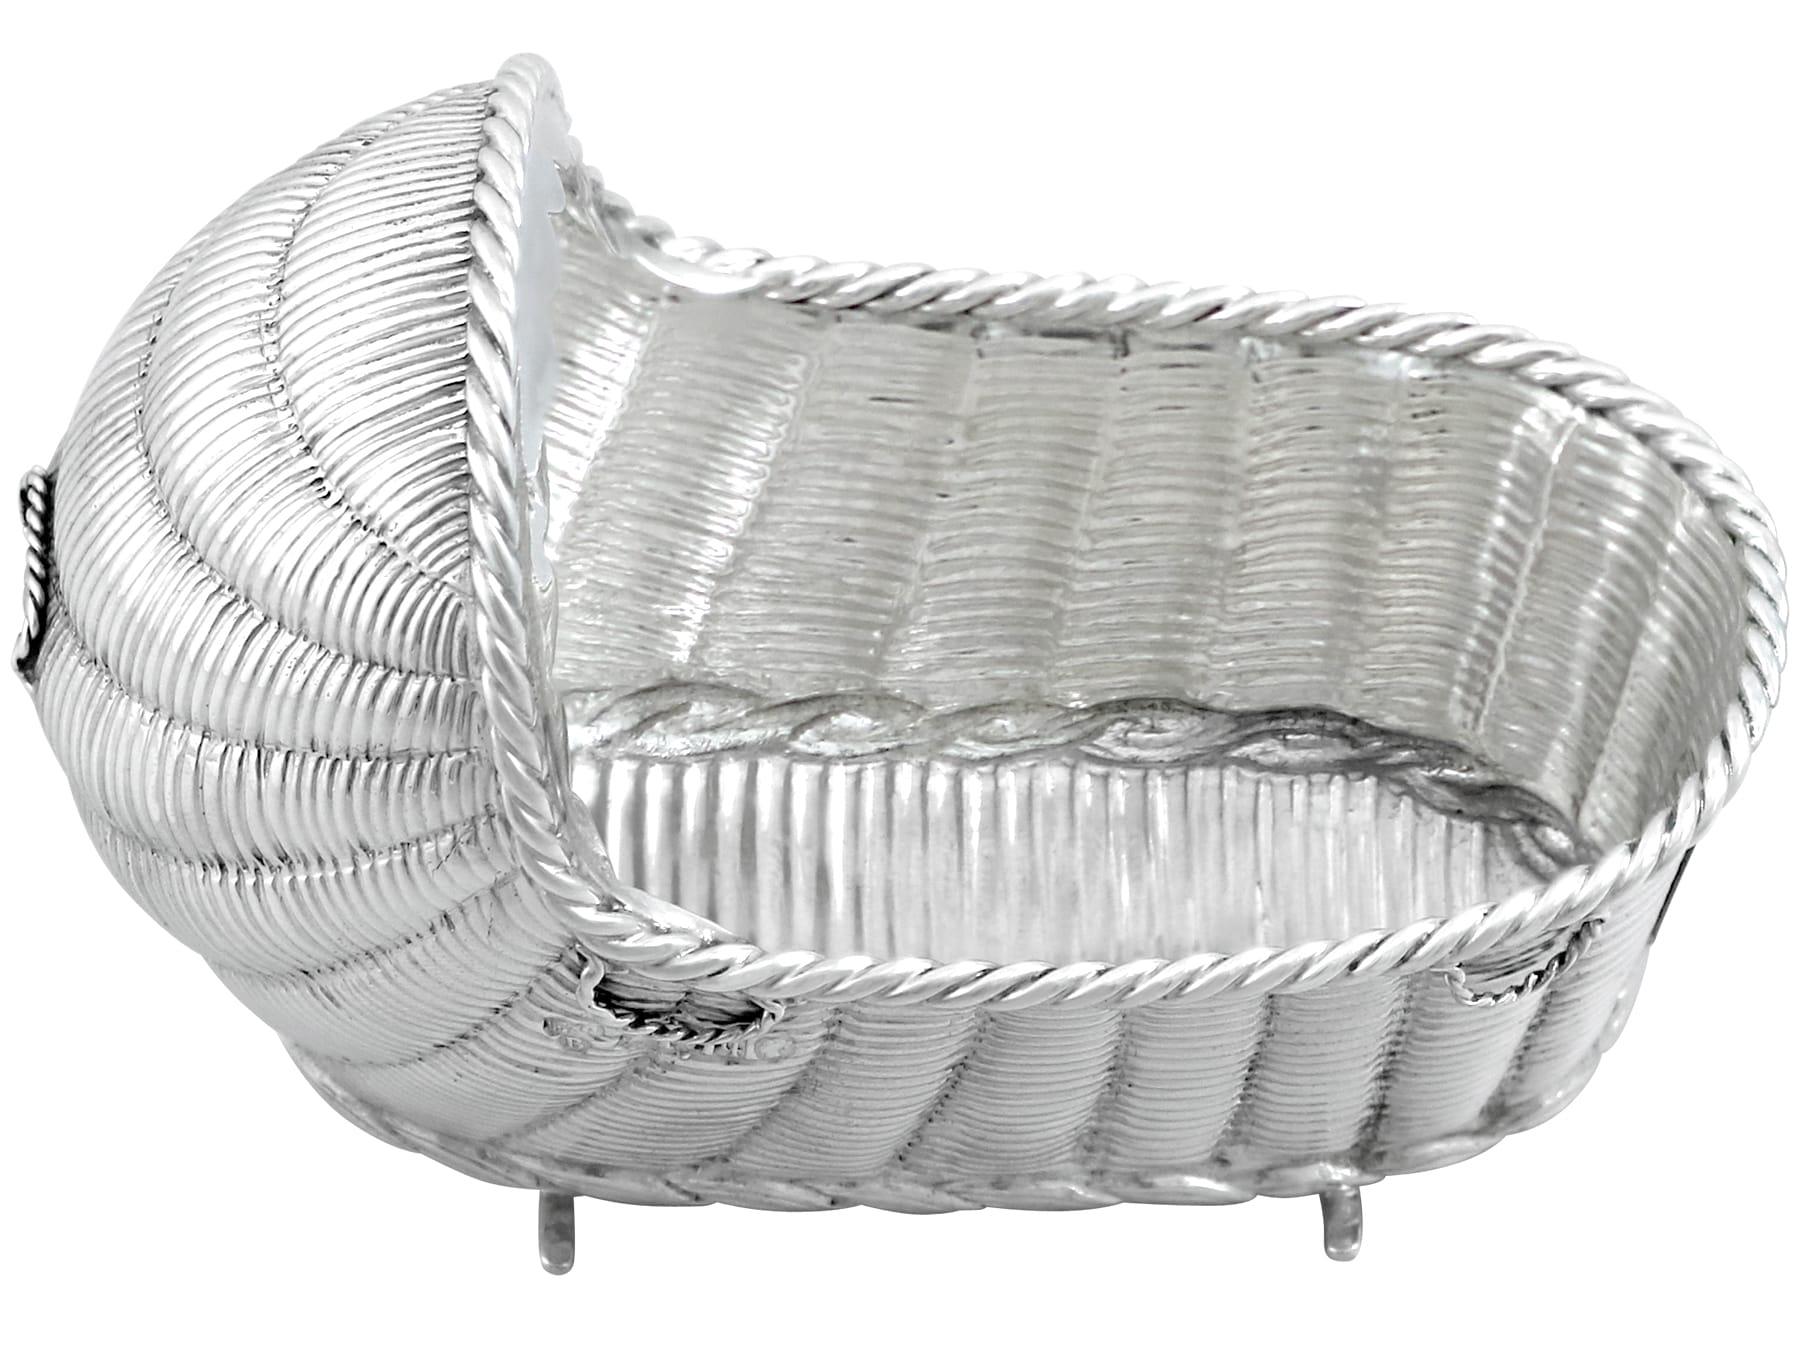 Antique Victorian Sterling Silver Cradle/Bassinet Dish 1871 In Excellent Condition For Sale In Jesmond, Newcastle Upon Tyne